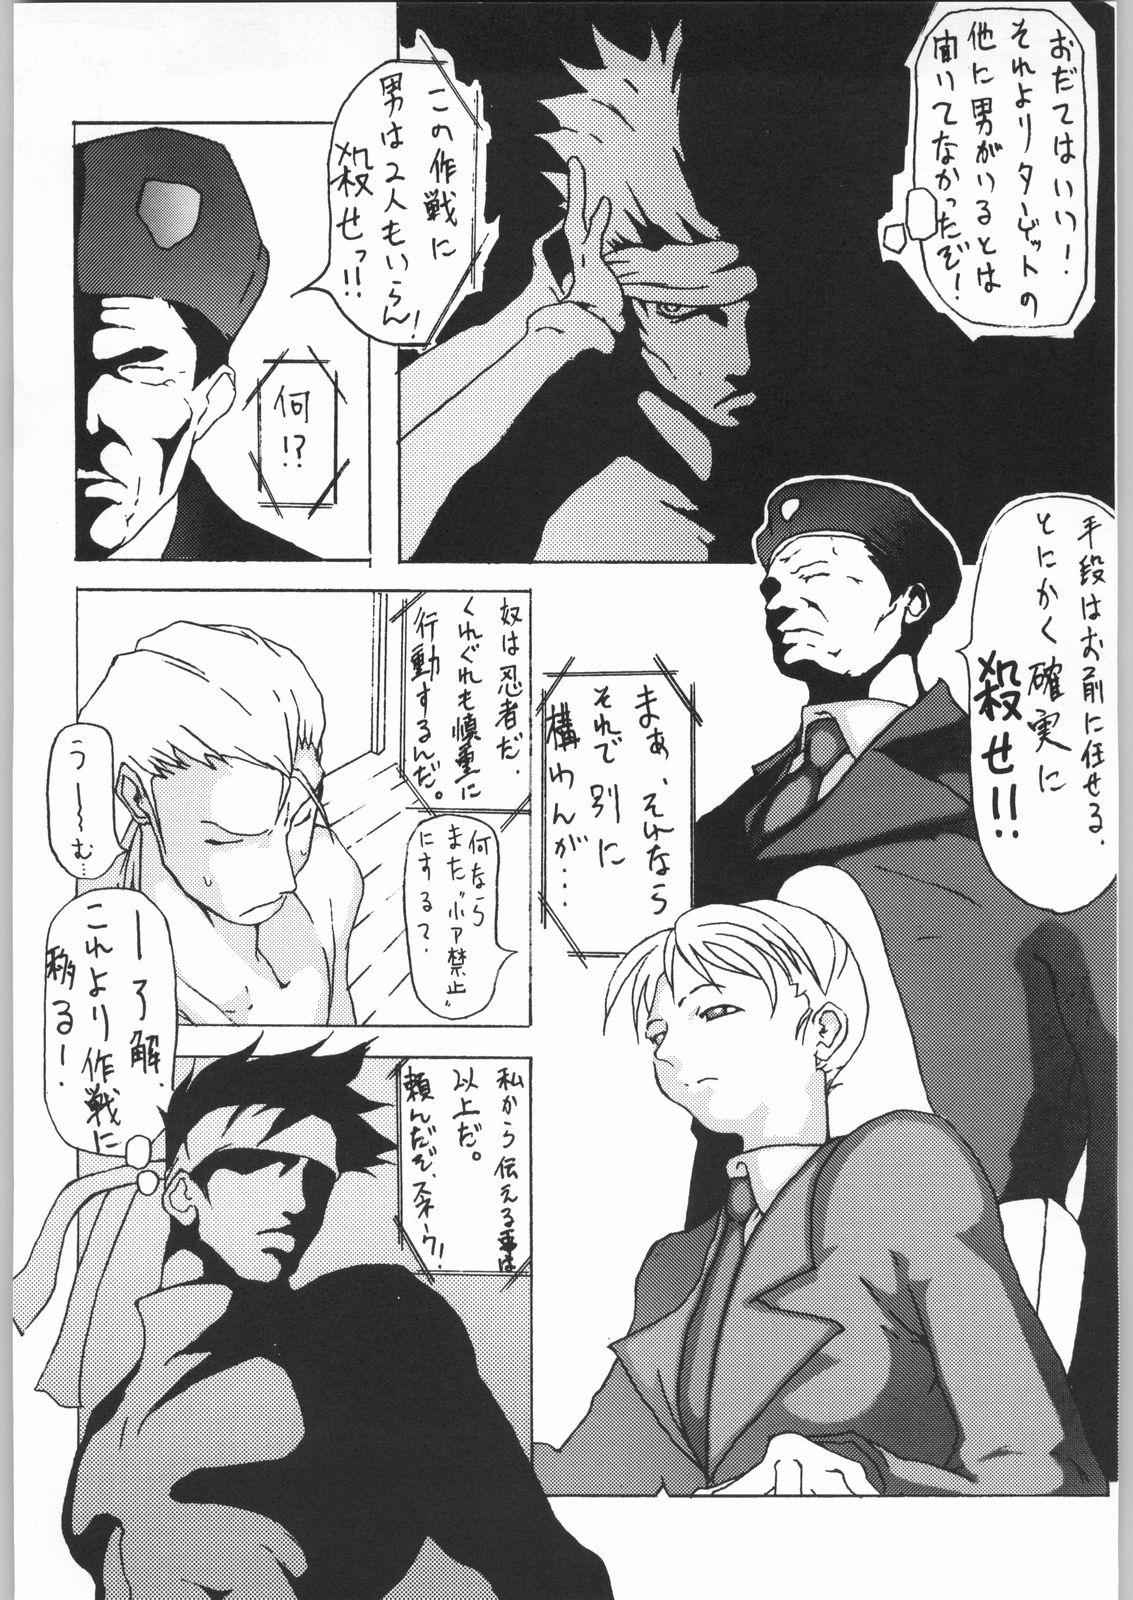 Boots Shiranui - King of fighters Oral Sex - Page 7